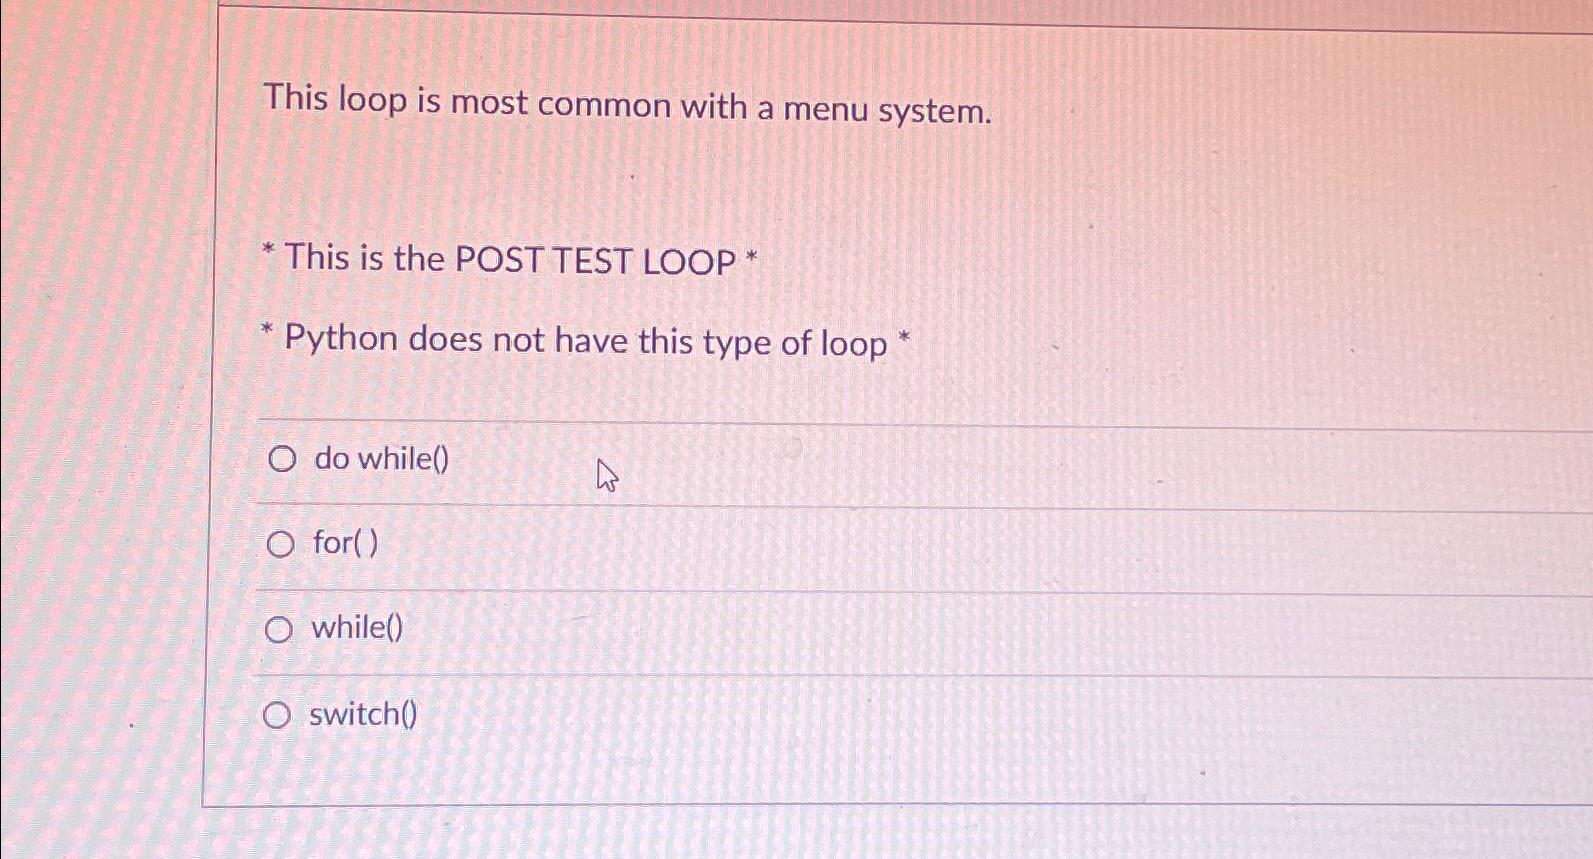 This loop is most common with a menu system. 20 This is the POST TEST LOOP * Python does not have this type